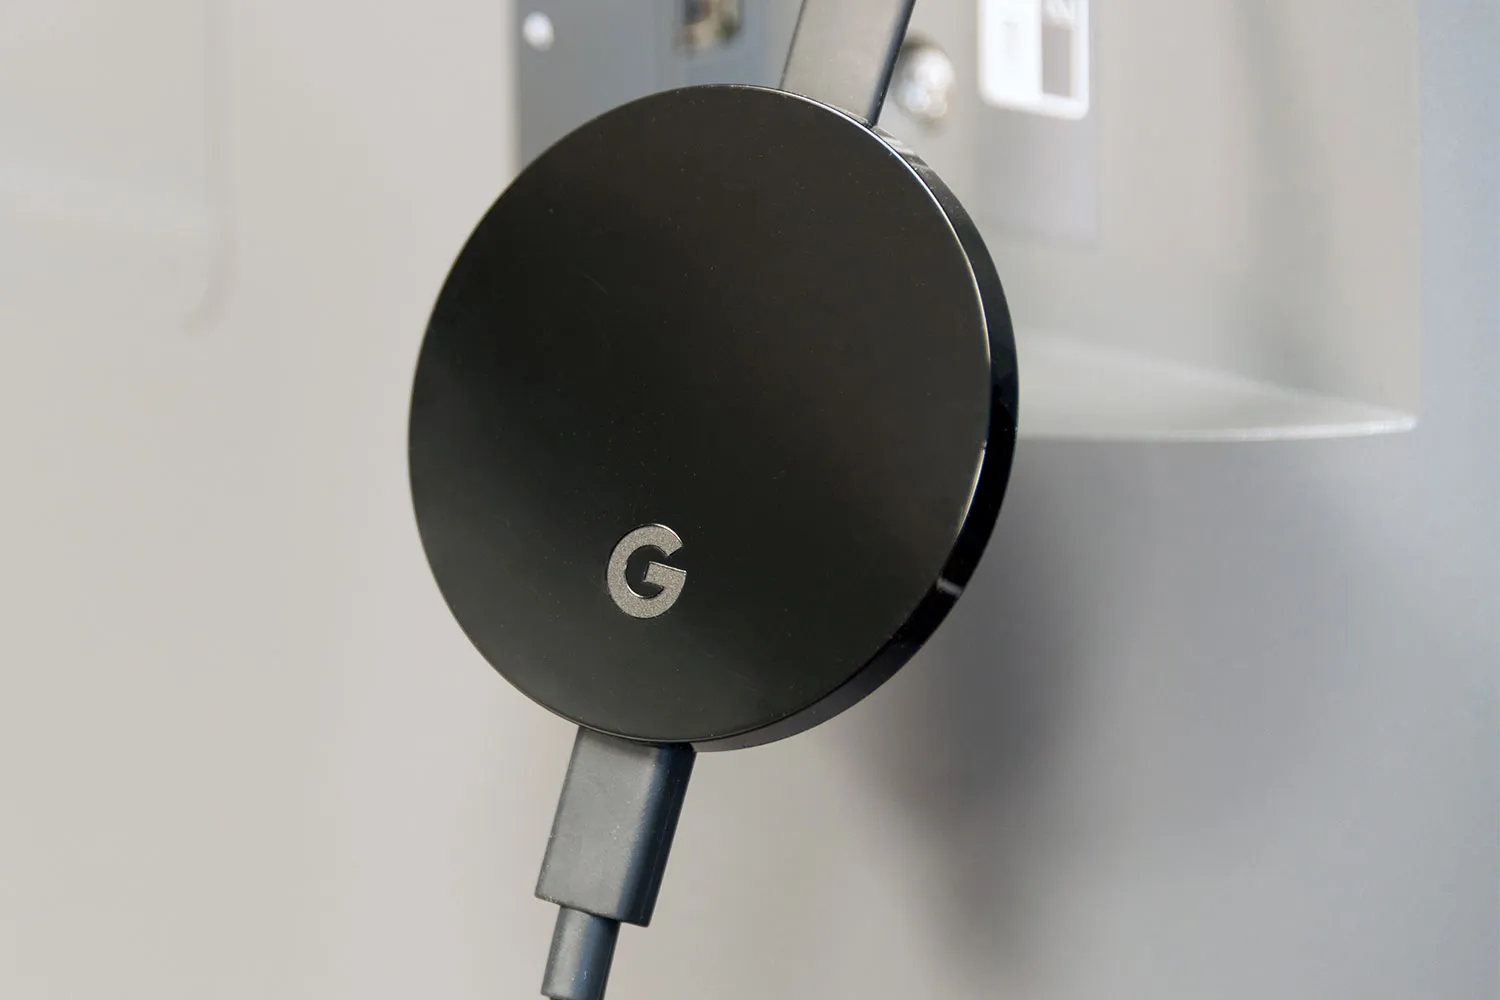 Chromecast Ultra Review: Better Video Quality Comes at a Cost